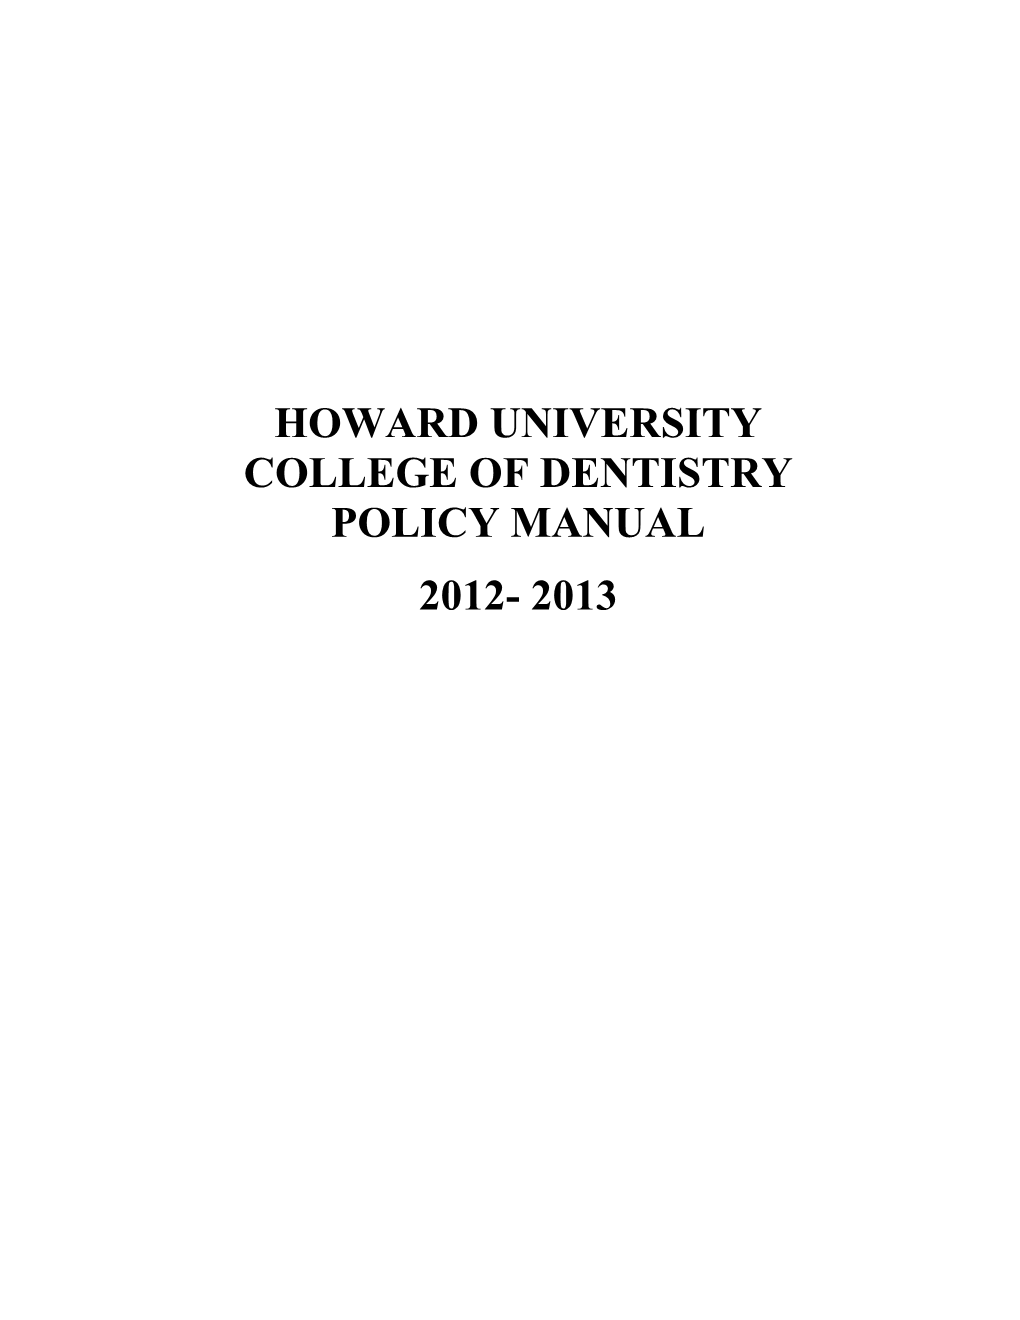 Howard University College of Dentistry Policy Manual 2012